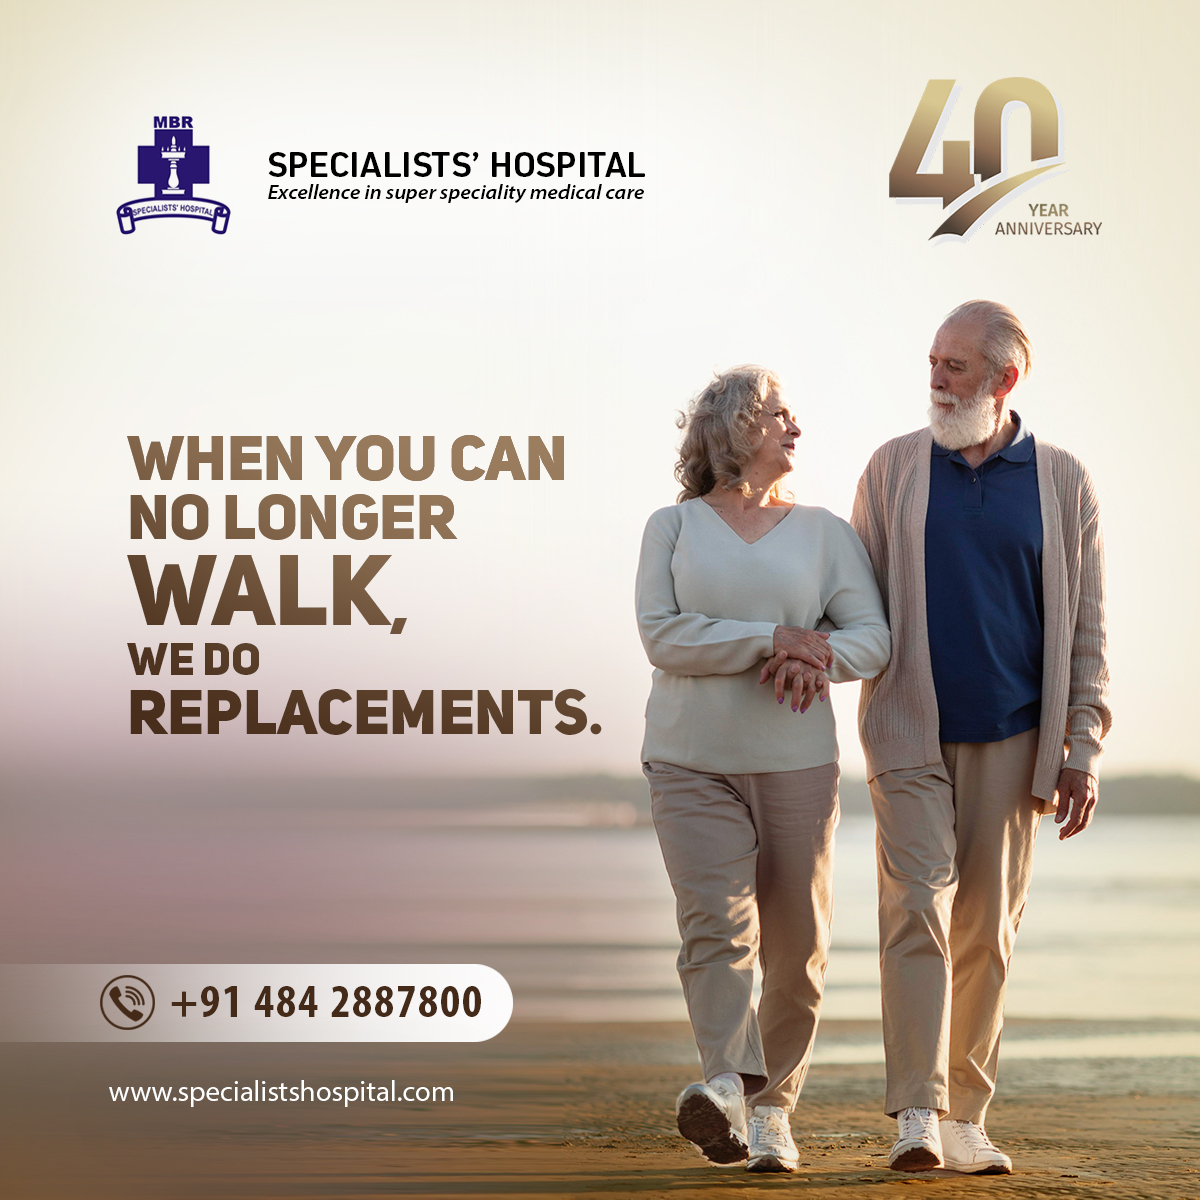 Knee replacement is a life changing solution relieves patients of pain and improves the quality of life. Replace the knee and you can replace the agony.

#orthopaedicspecialist #orthopaedics #orthopaedicsurgery #arthroscopy #medicine #kneeinjuries #besthospital #osteoarthritis